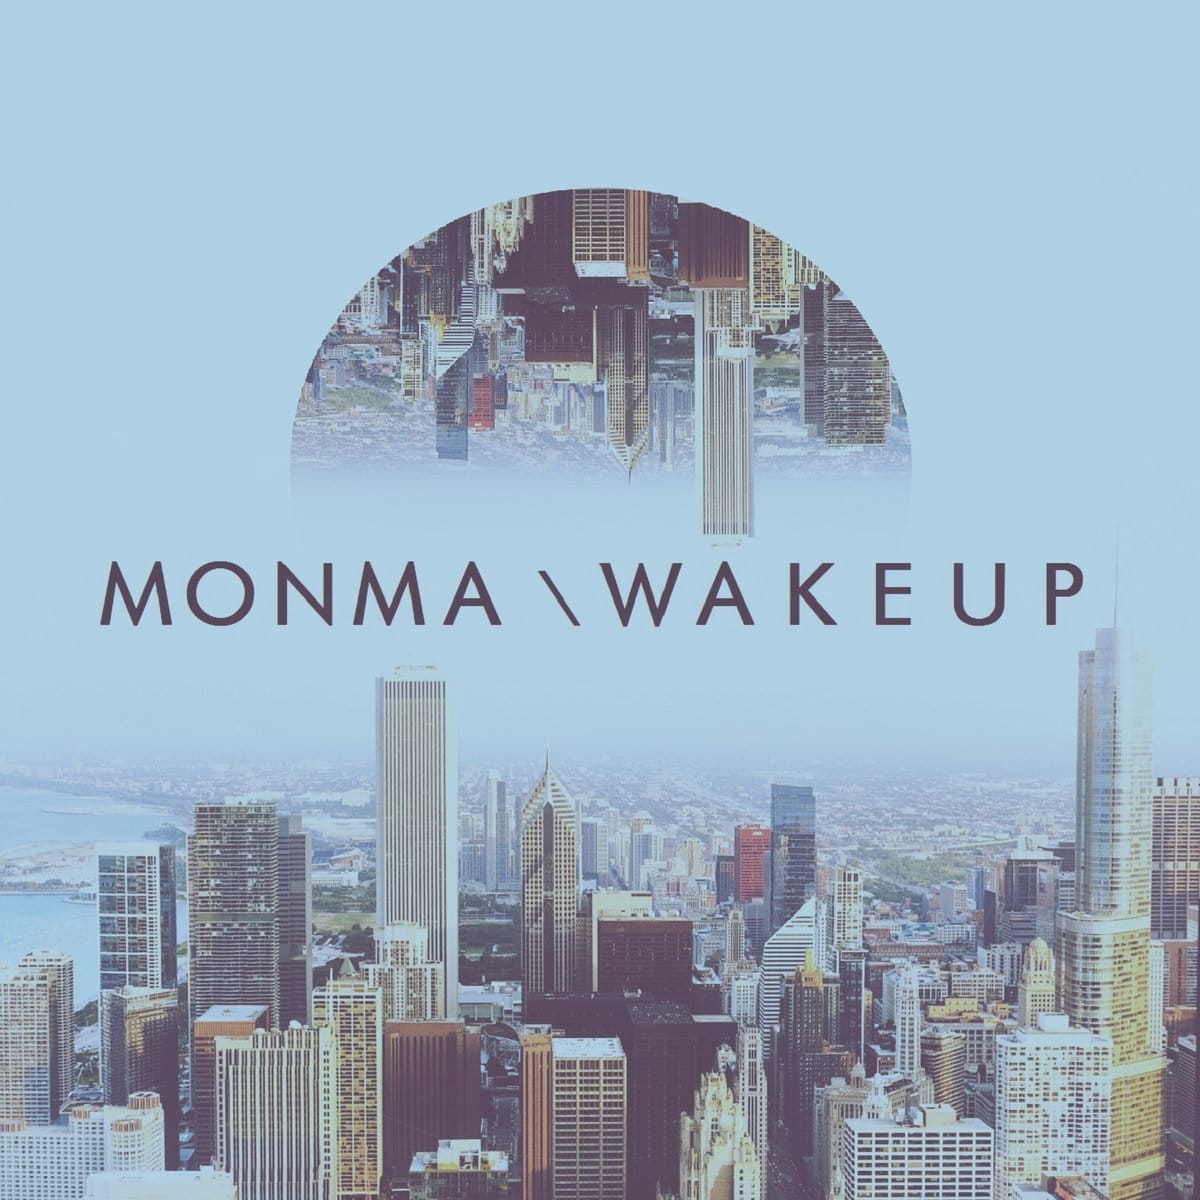 Monma - "WakeUp" (Release)